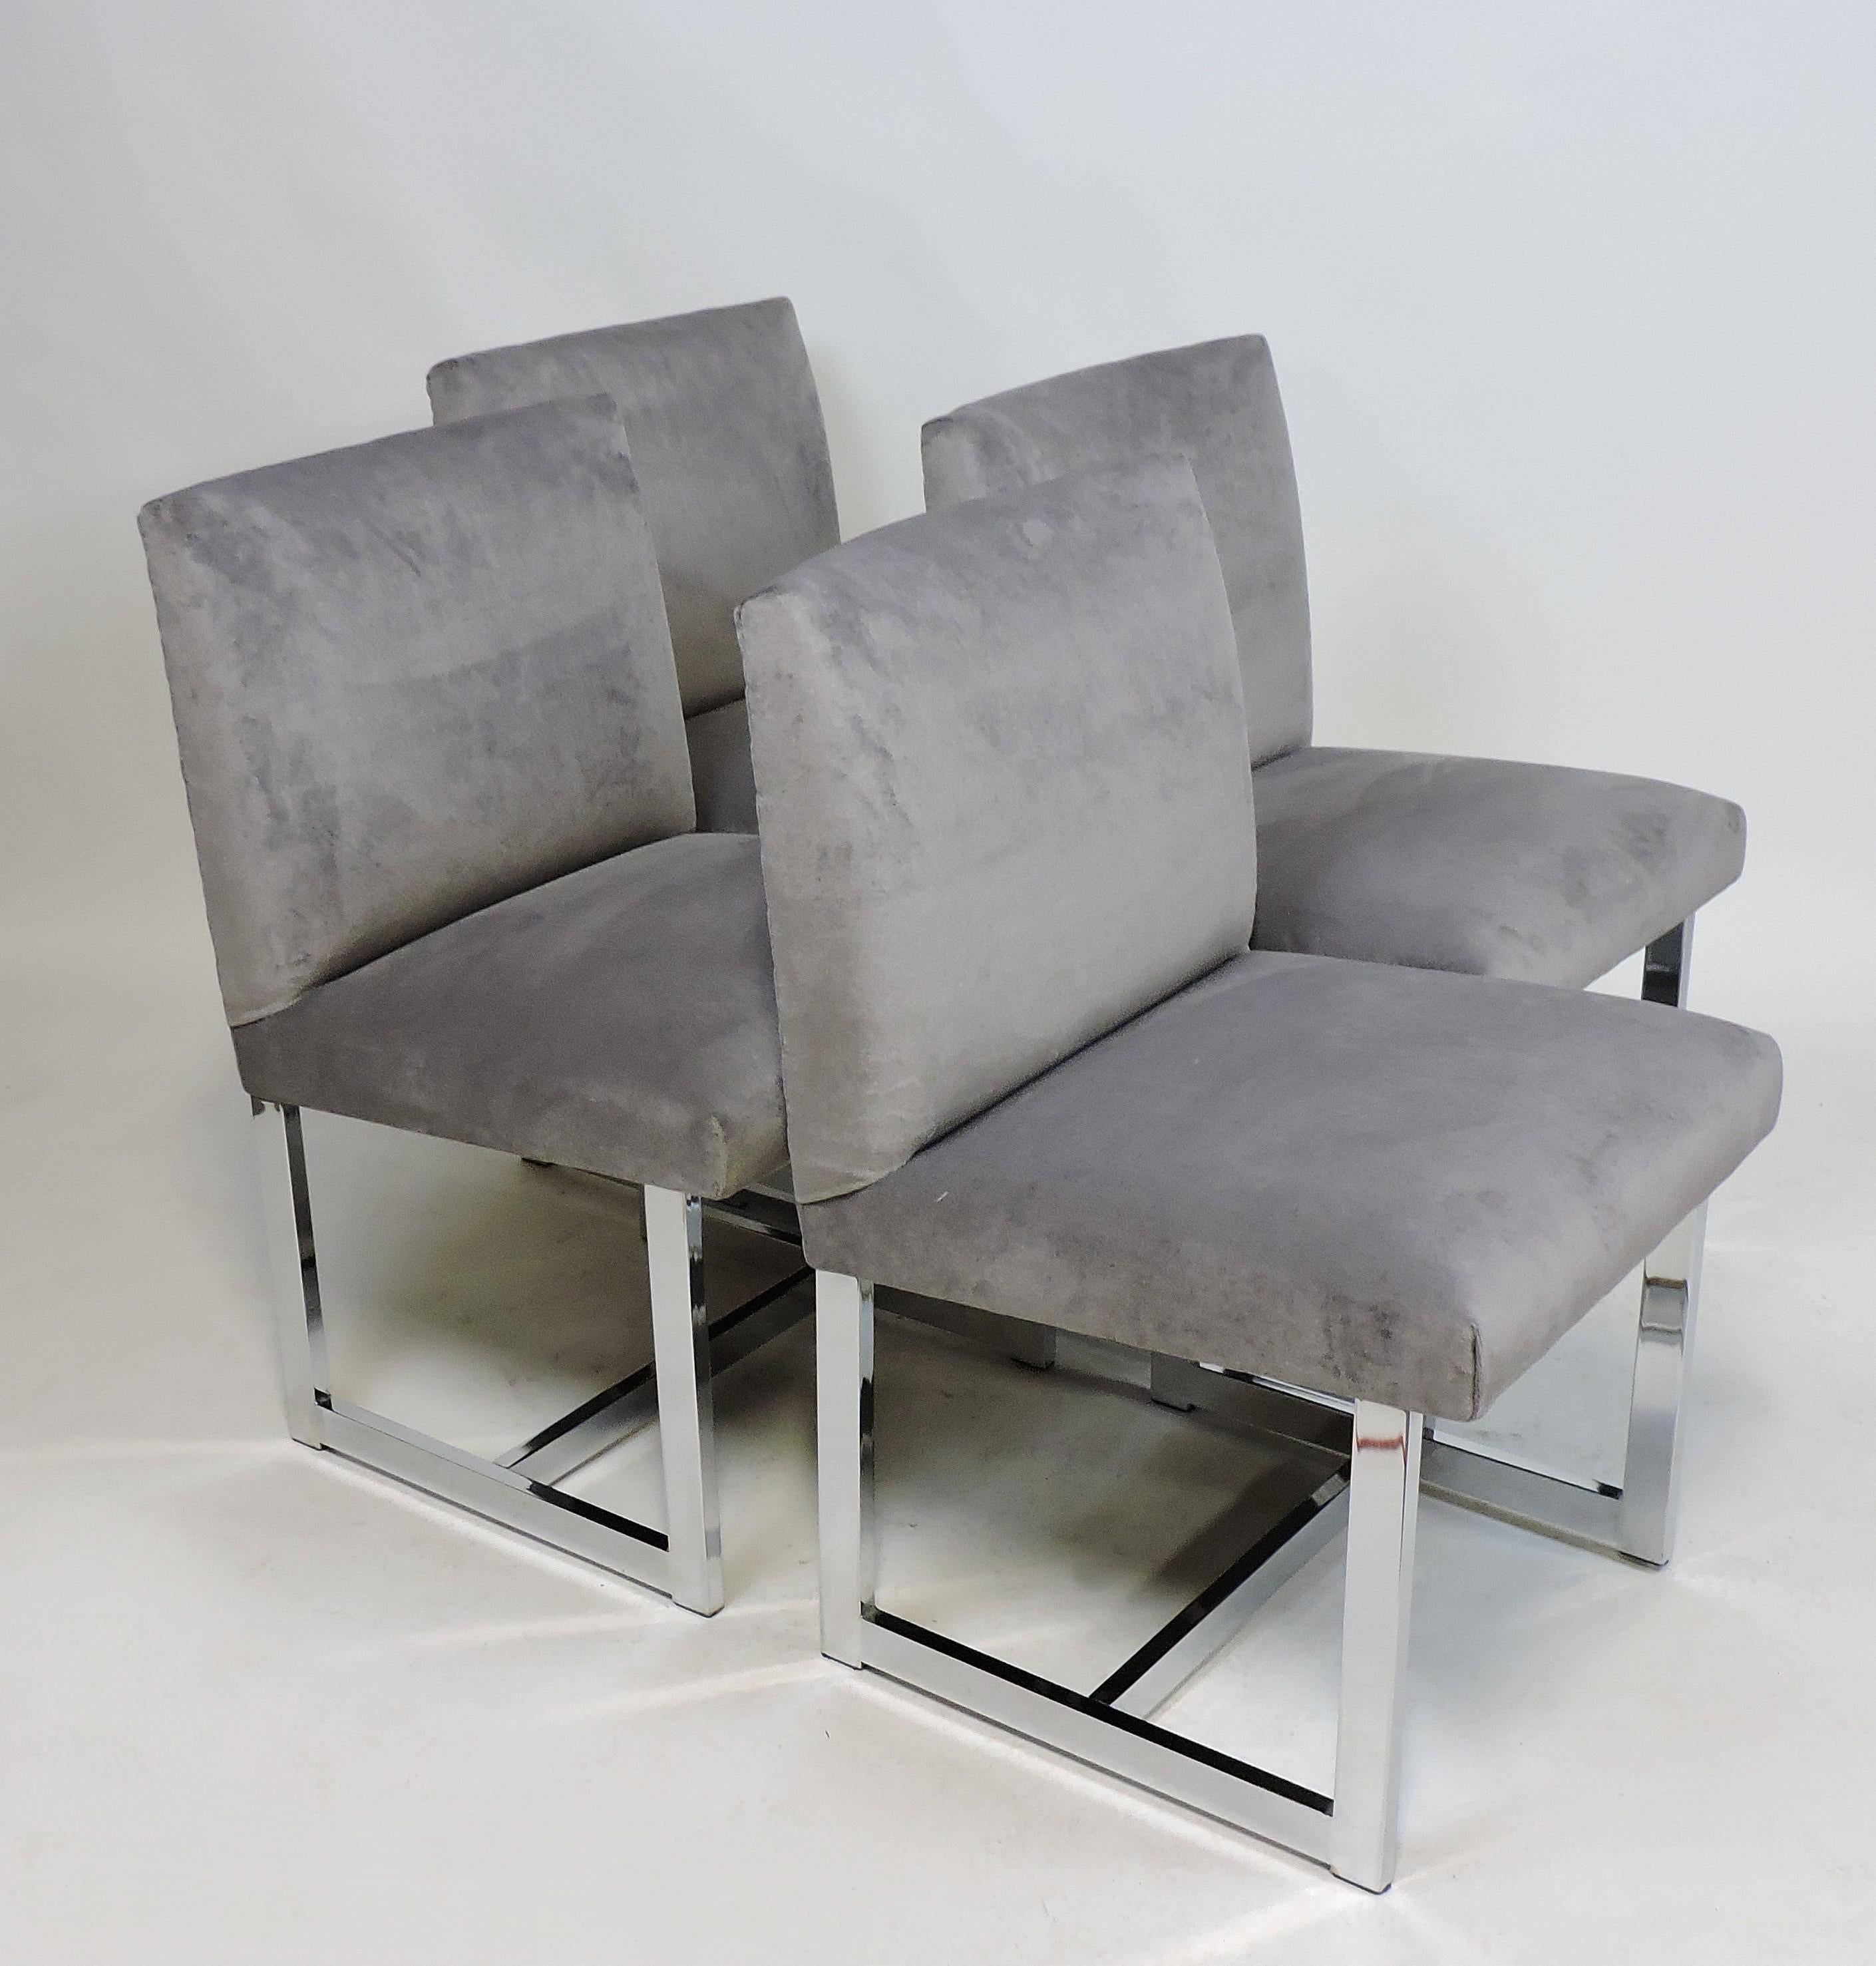 Late 20th Century Four Adrian Pearsall Mid-Century Modern Chrome and Velvet Dining Chairs